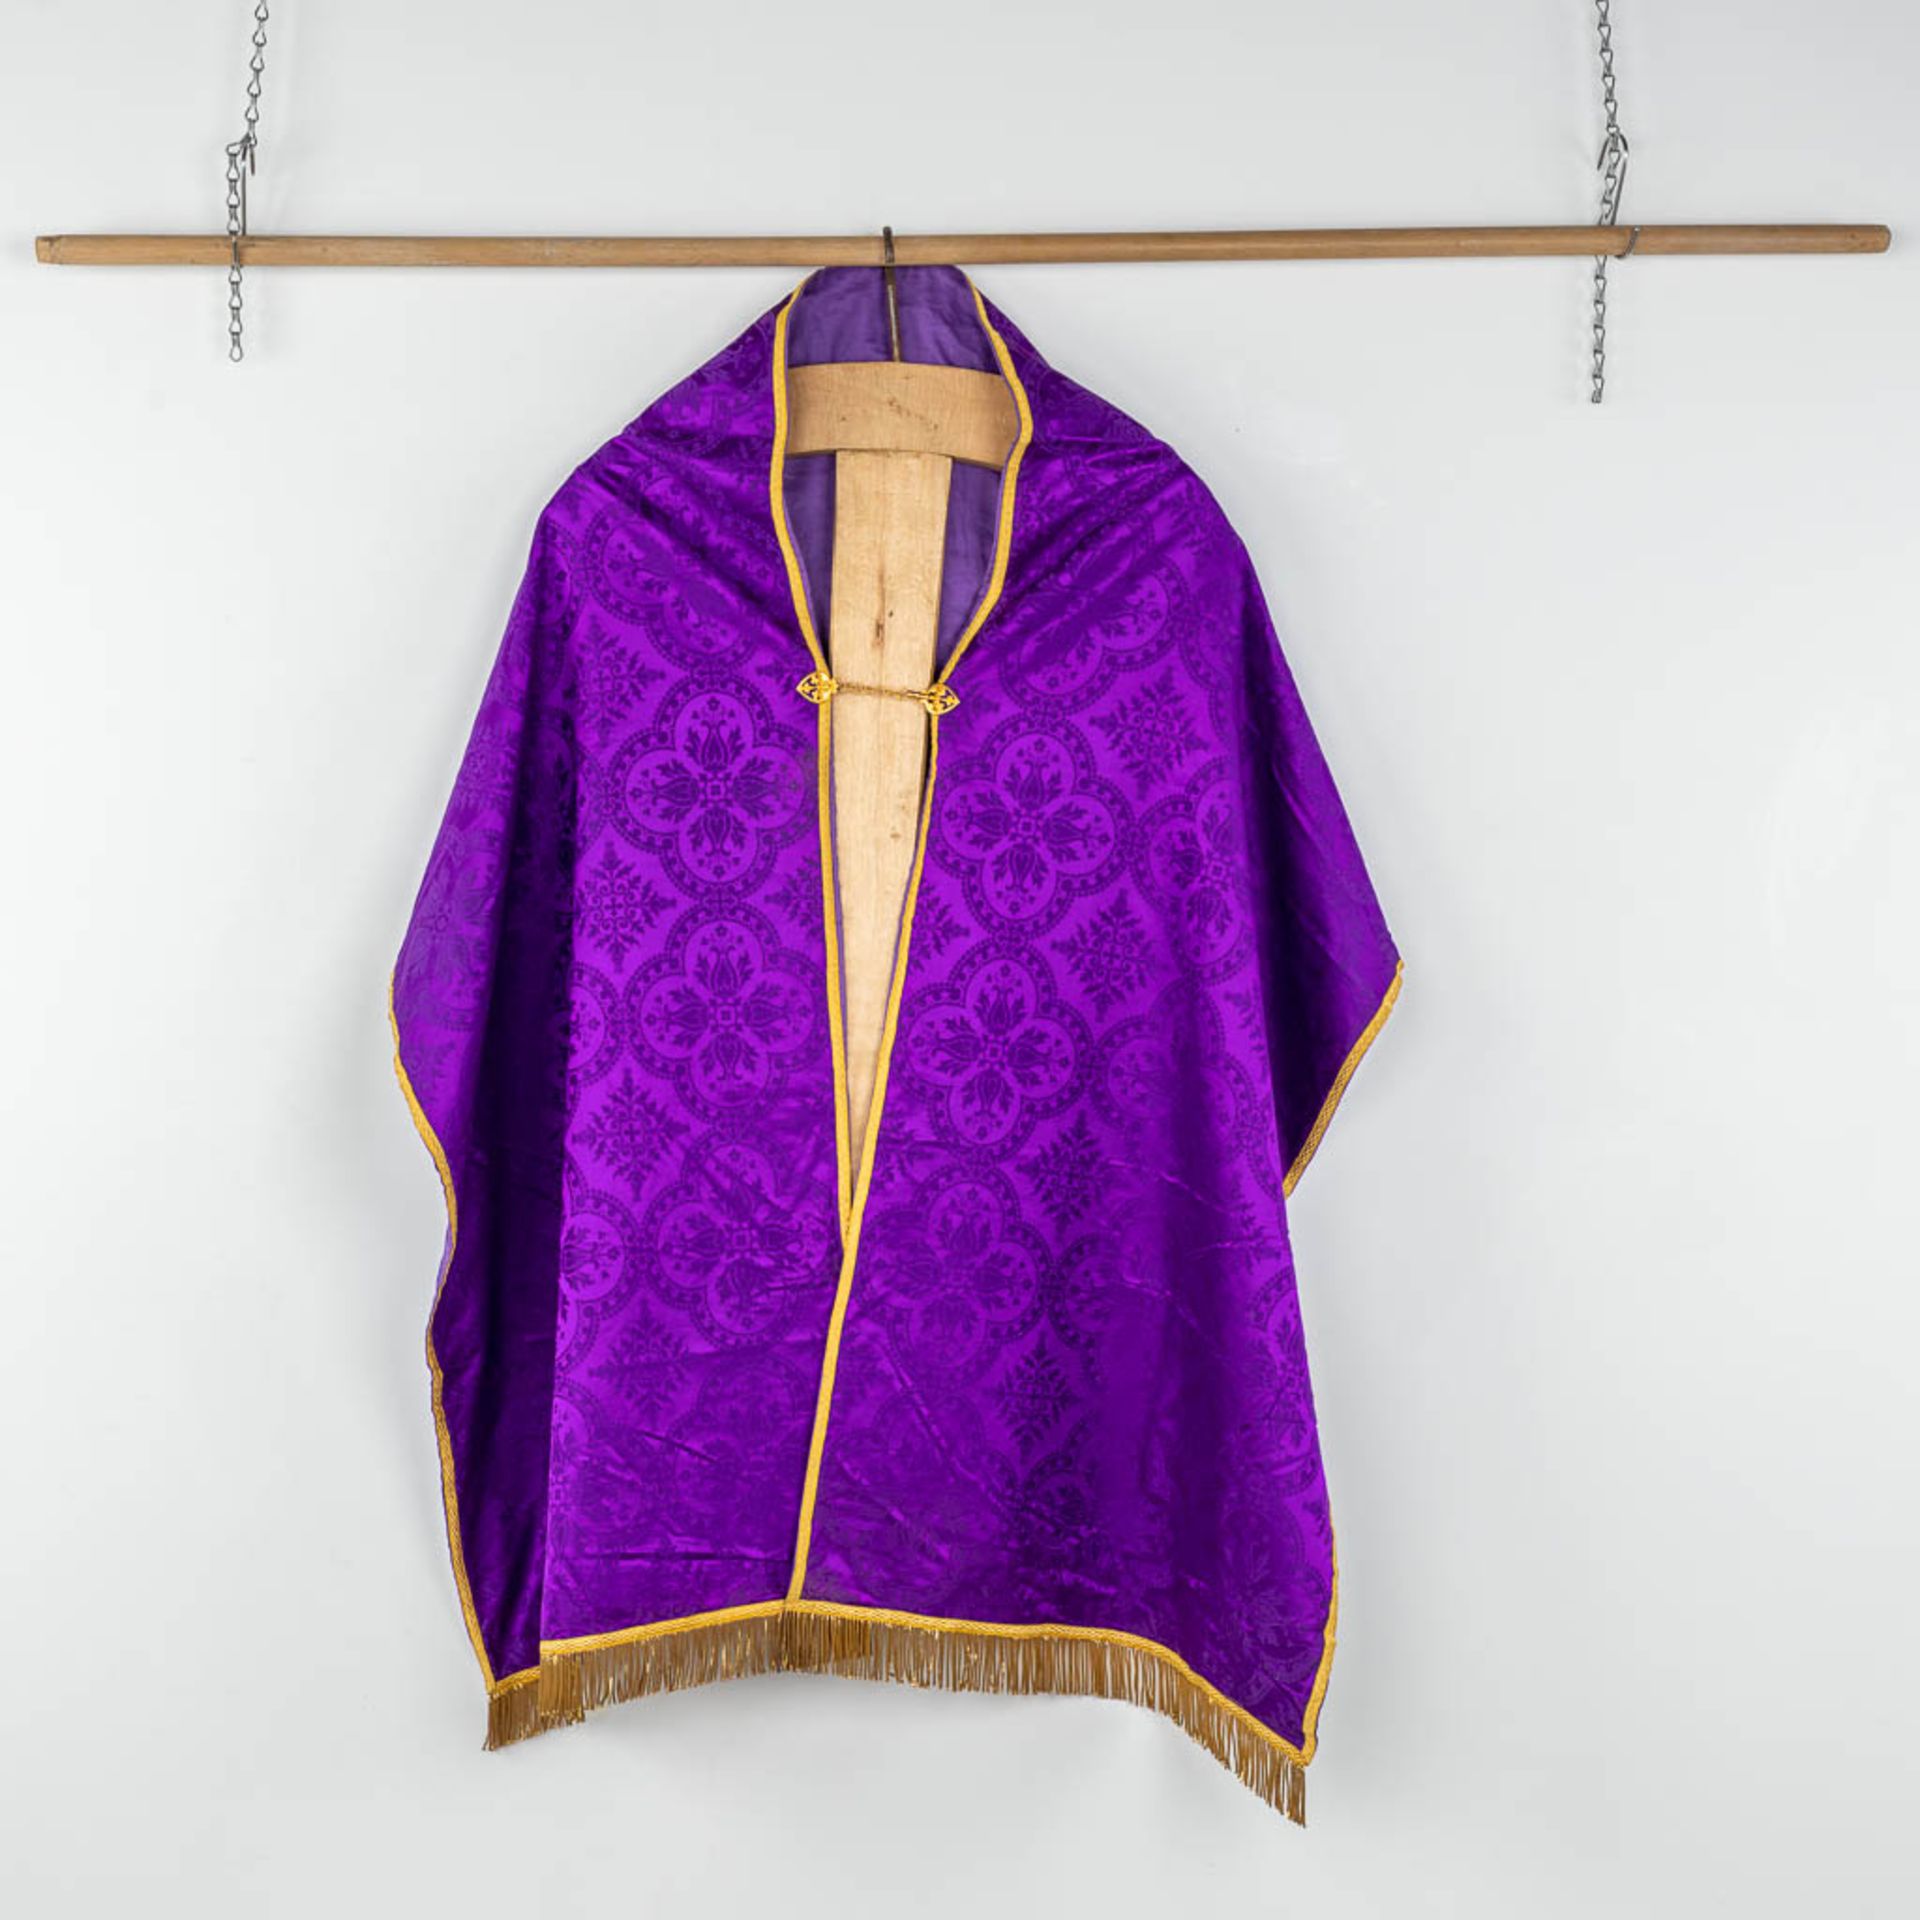 A Cope and Humeral Veil, finished with thick gold thread and purple fabric and the IHS logo. - Image 5 of 12